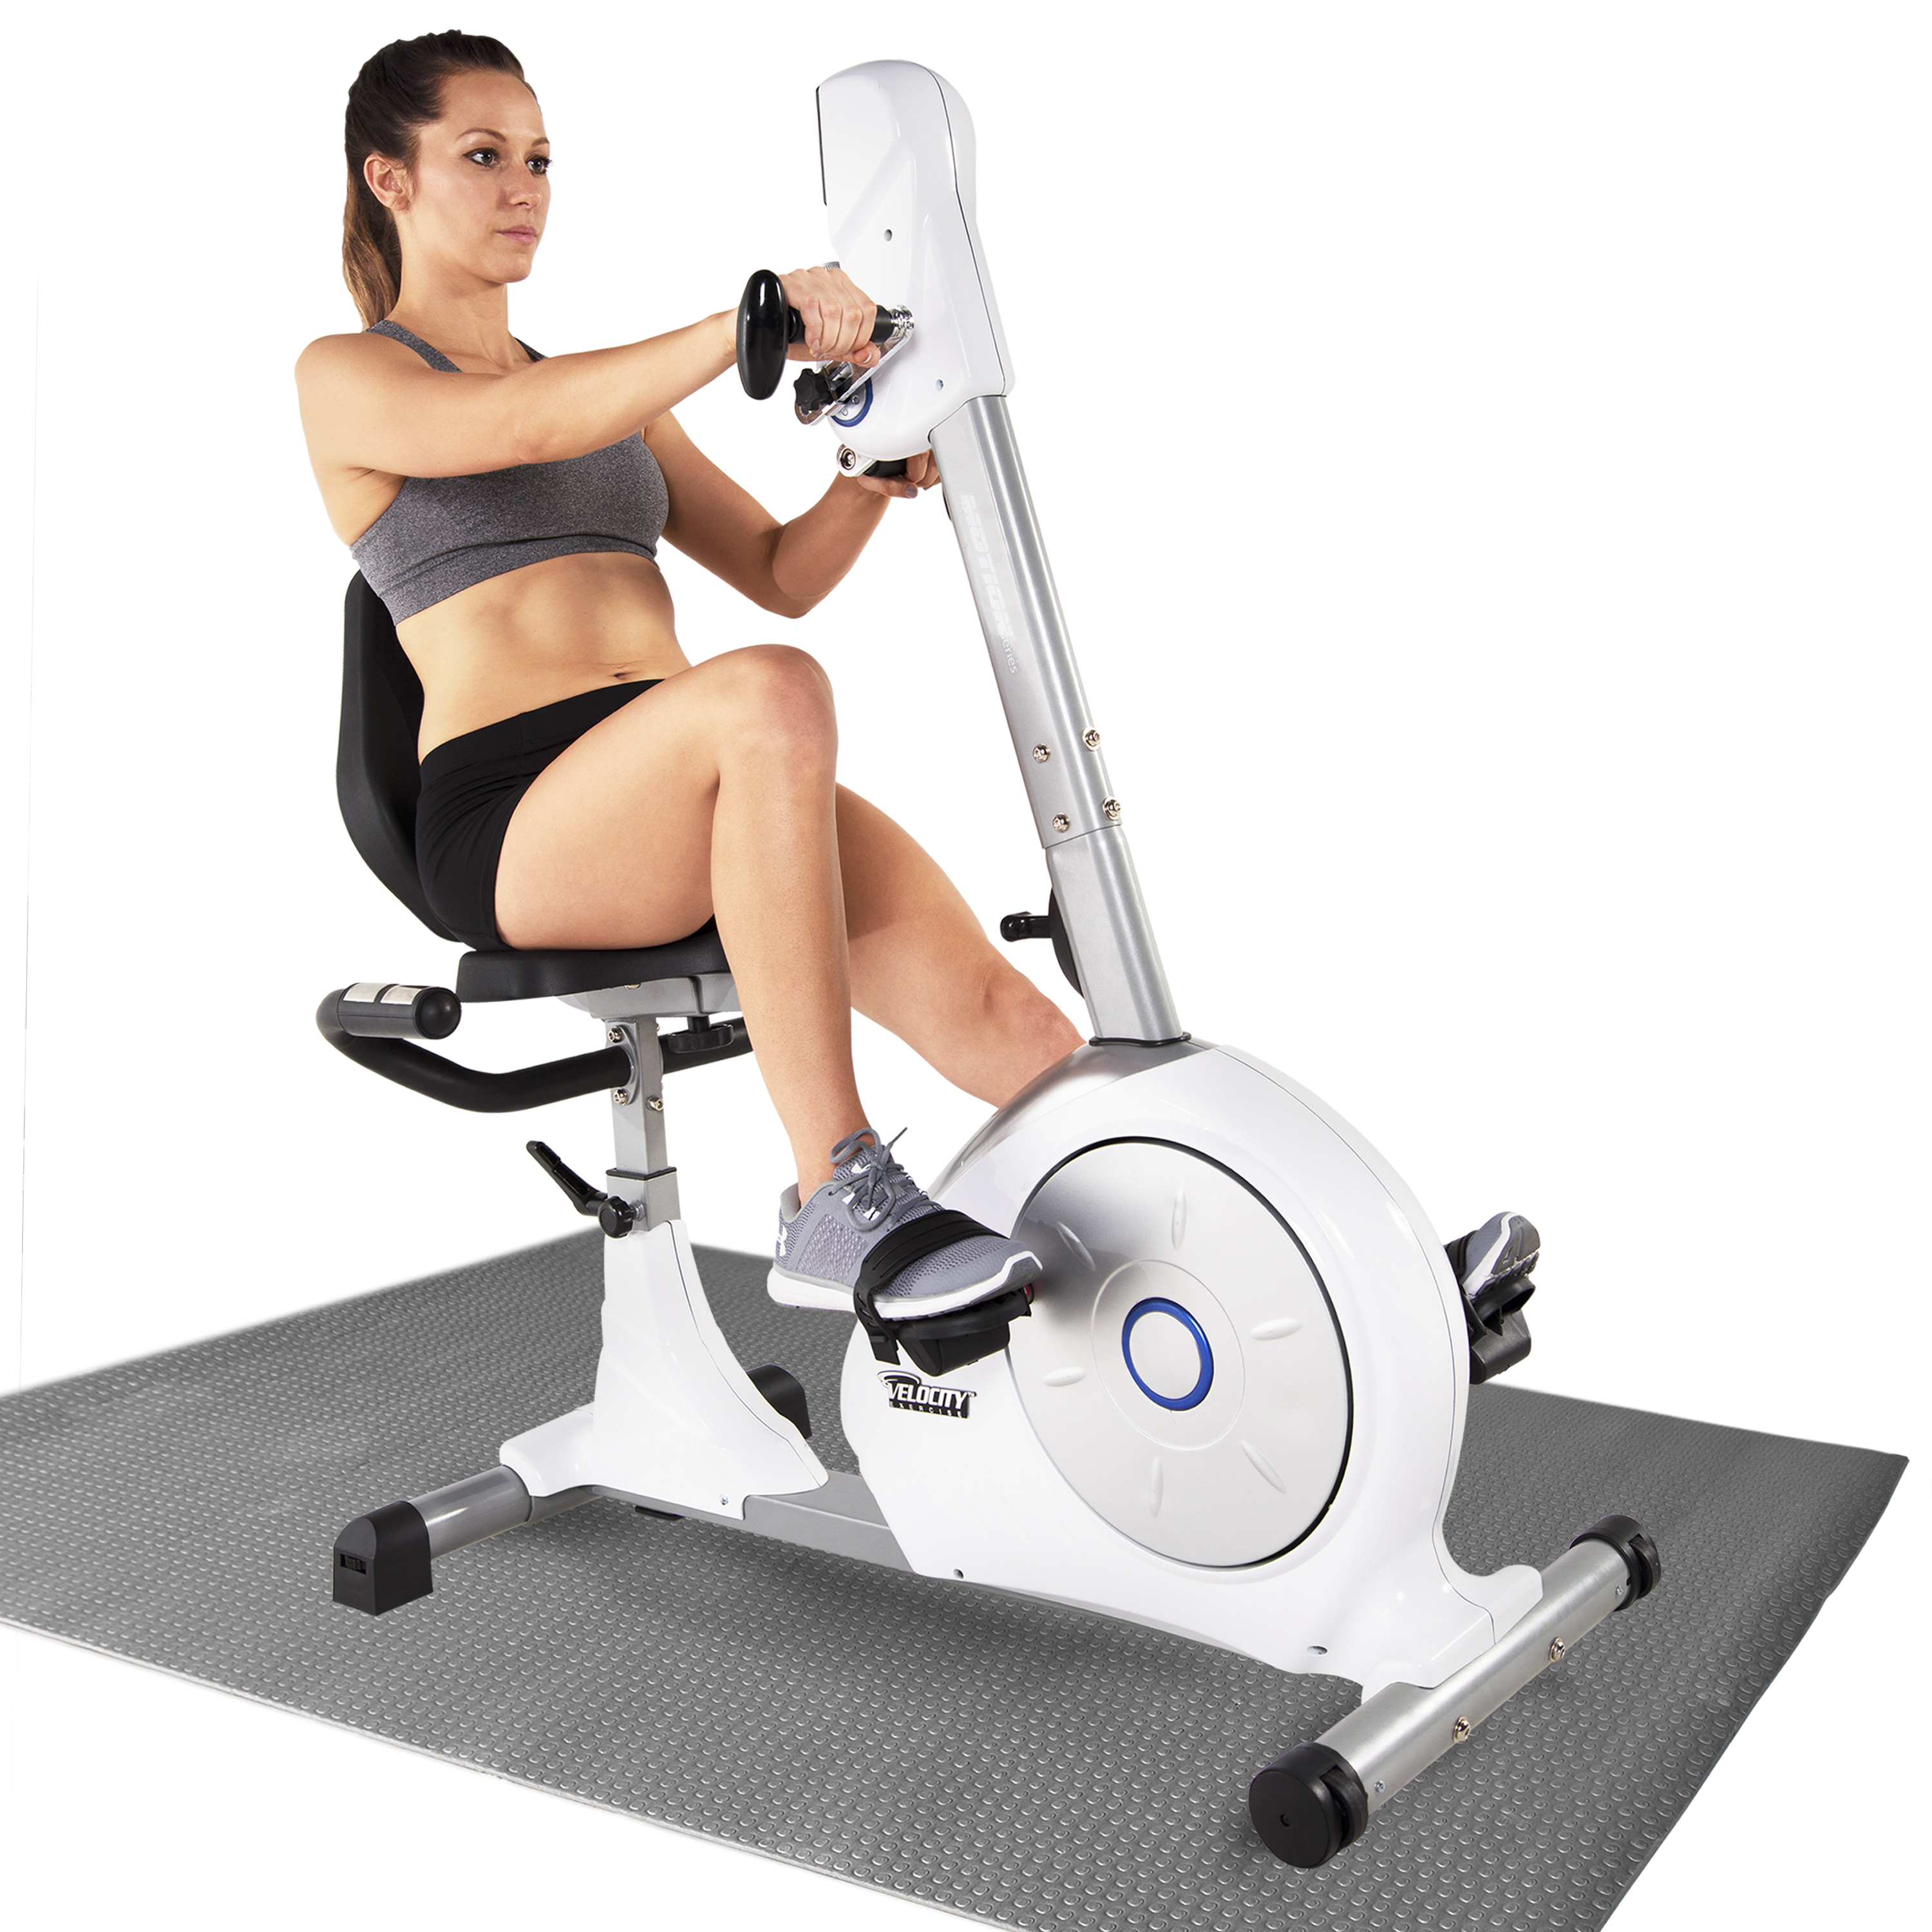 Velocity Exercise Dual Motion Recumbent Exercise Bike and Equipment Mat Combo - image 1 of 10